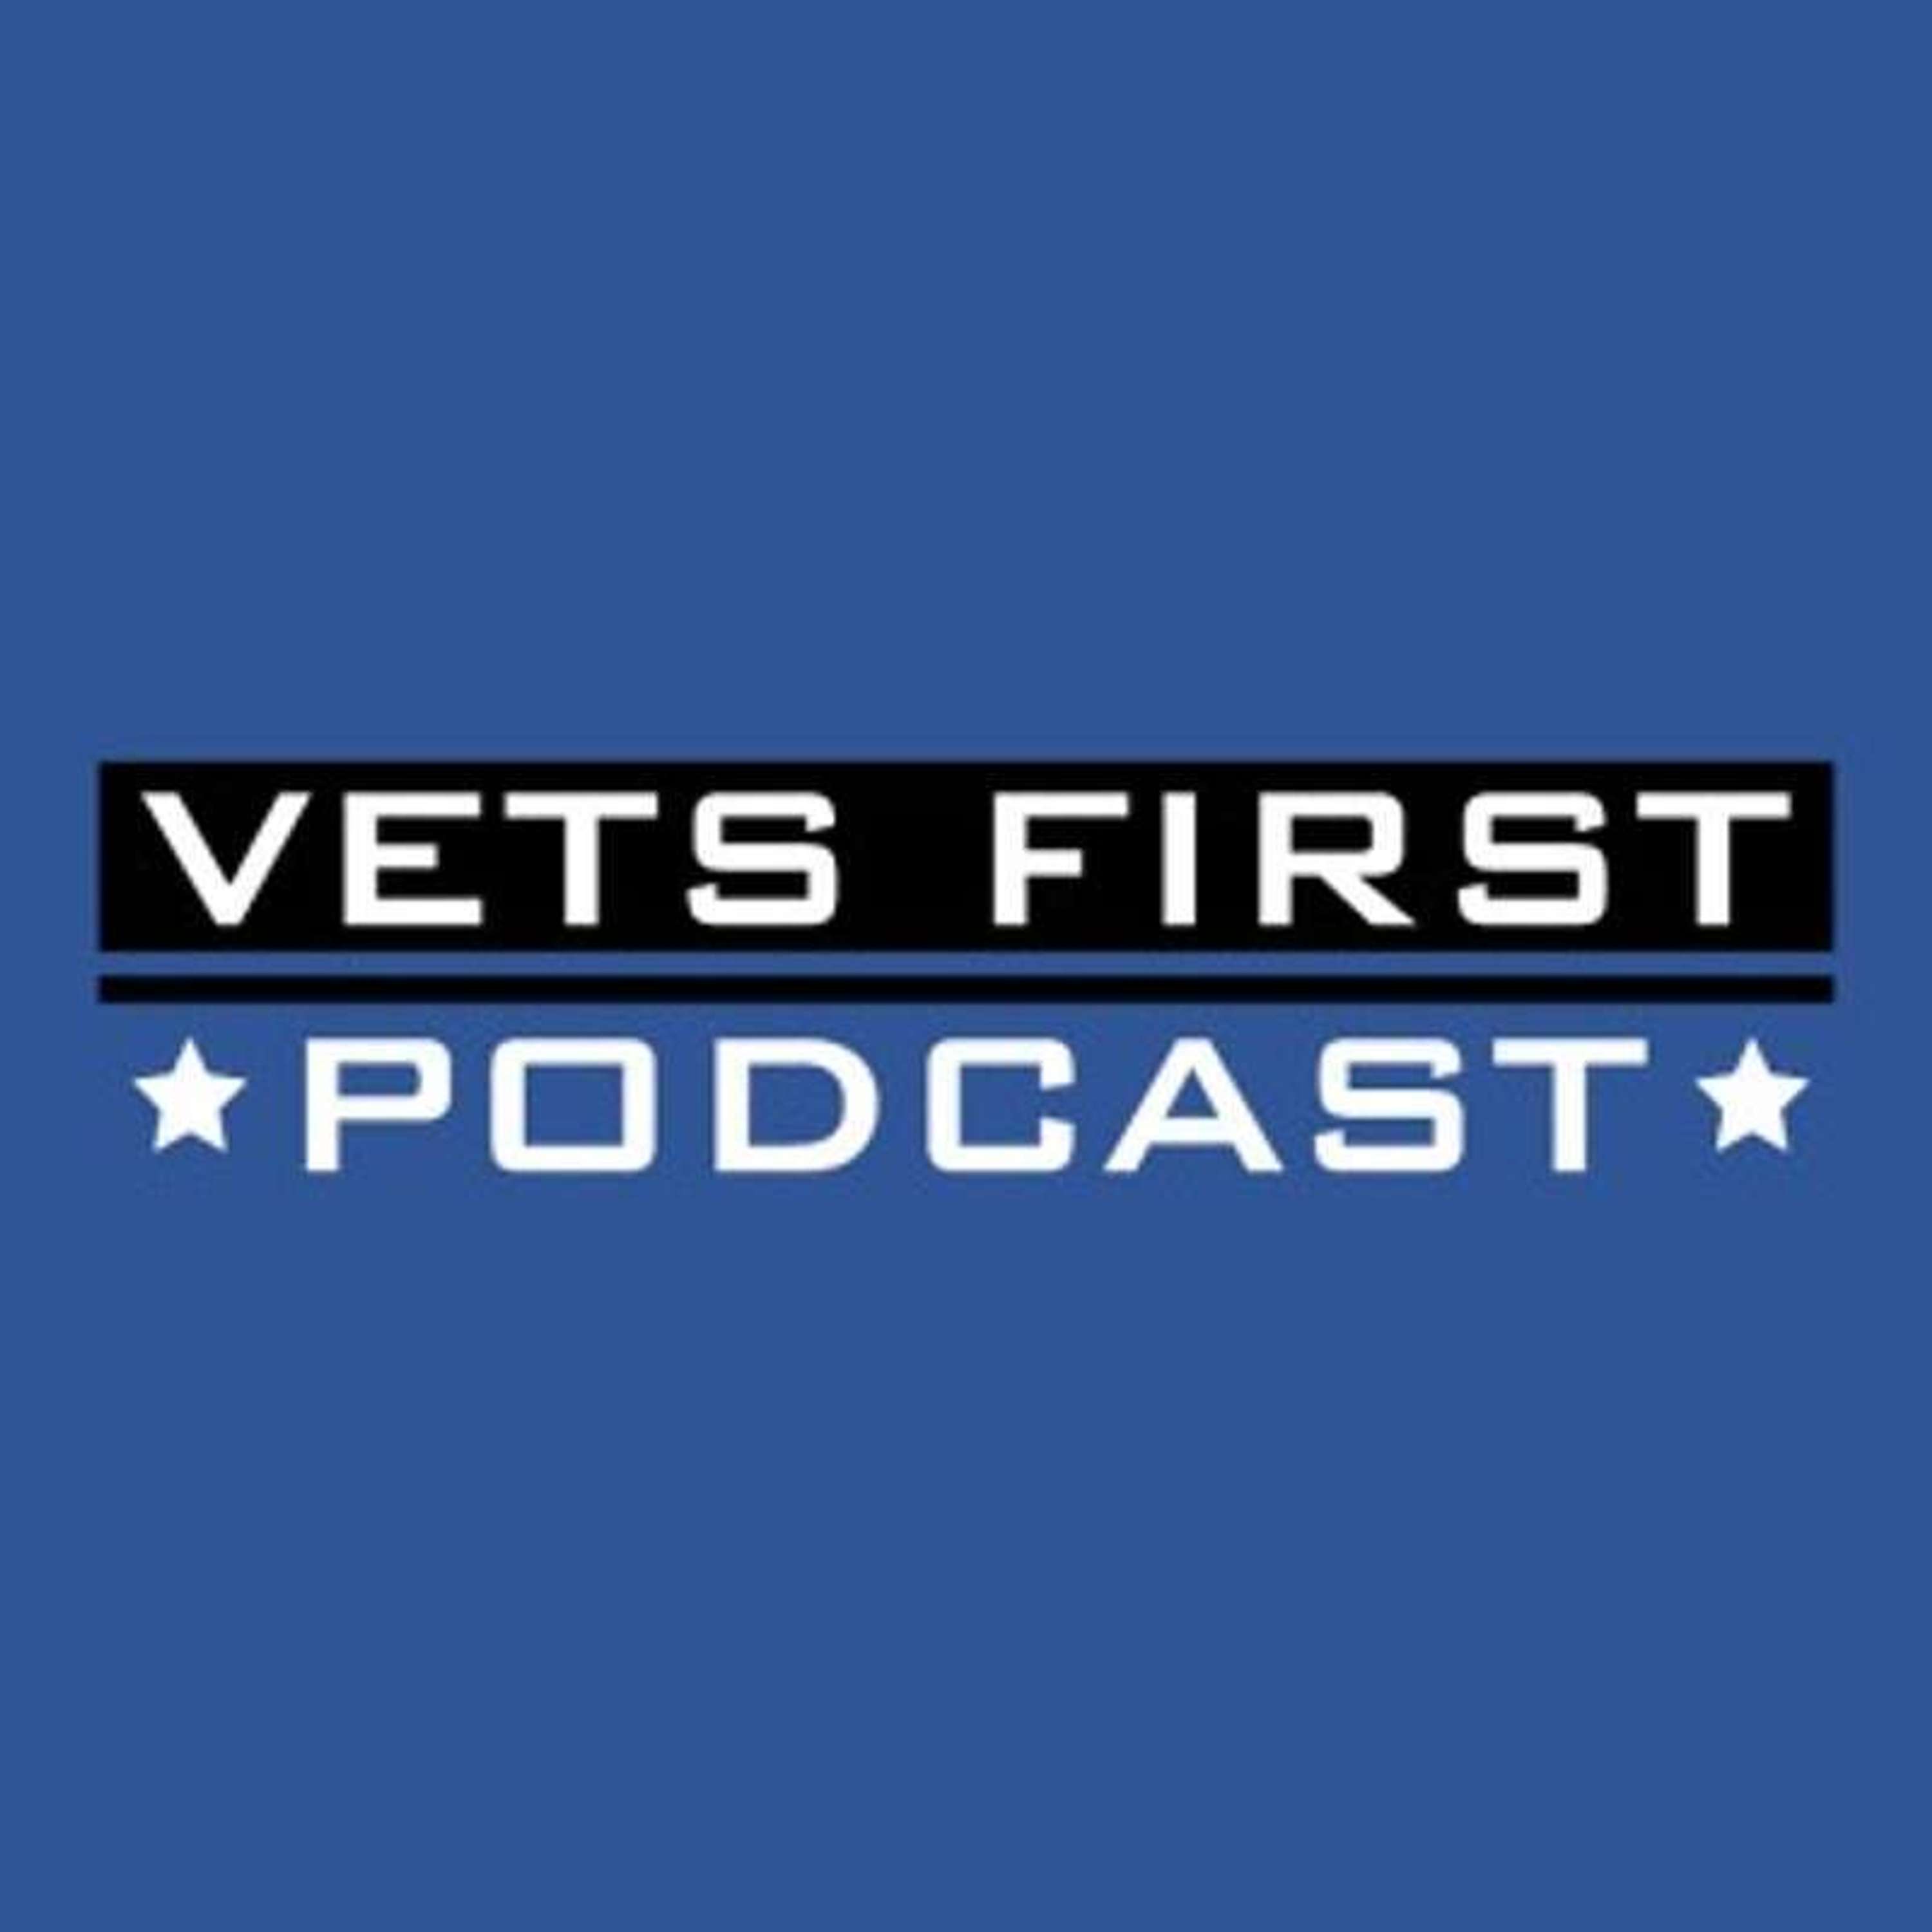 Season 2 Episode 9 – Supporting our active-duty military, Veterans, and first responders: Jim Ravella and the Gary Sinise Foundation